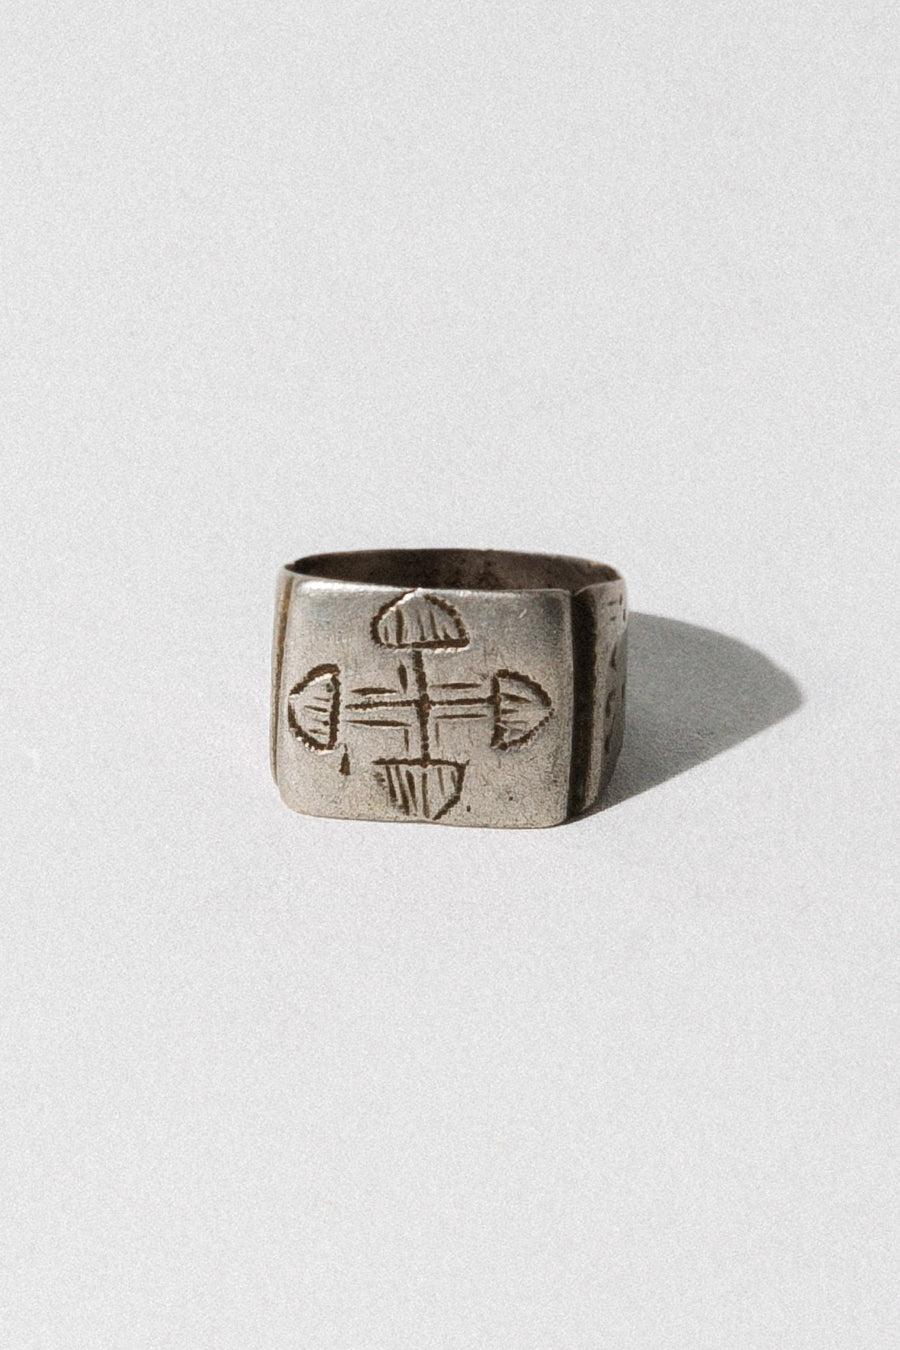 Ethnic Embellishments Jewelry Silver Copy of Moroccan Ring